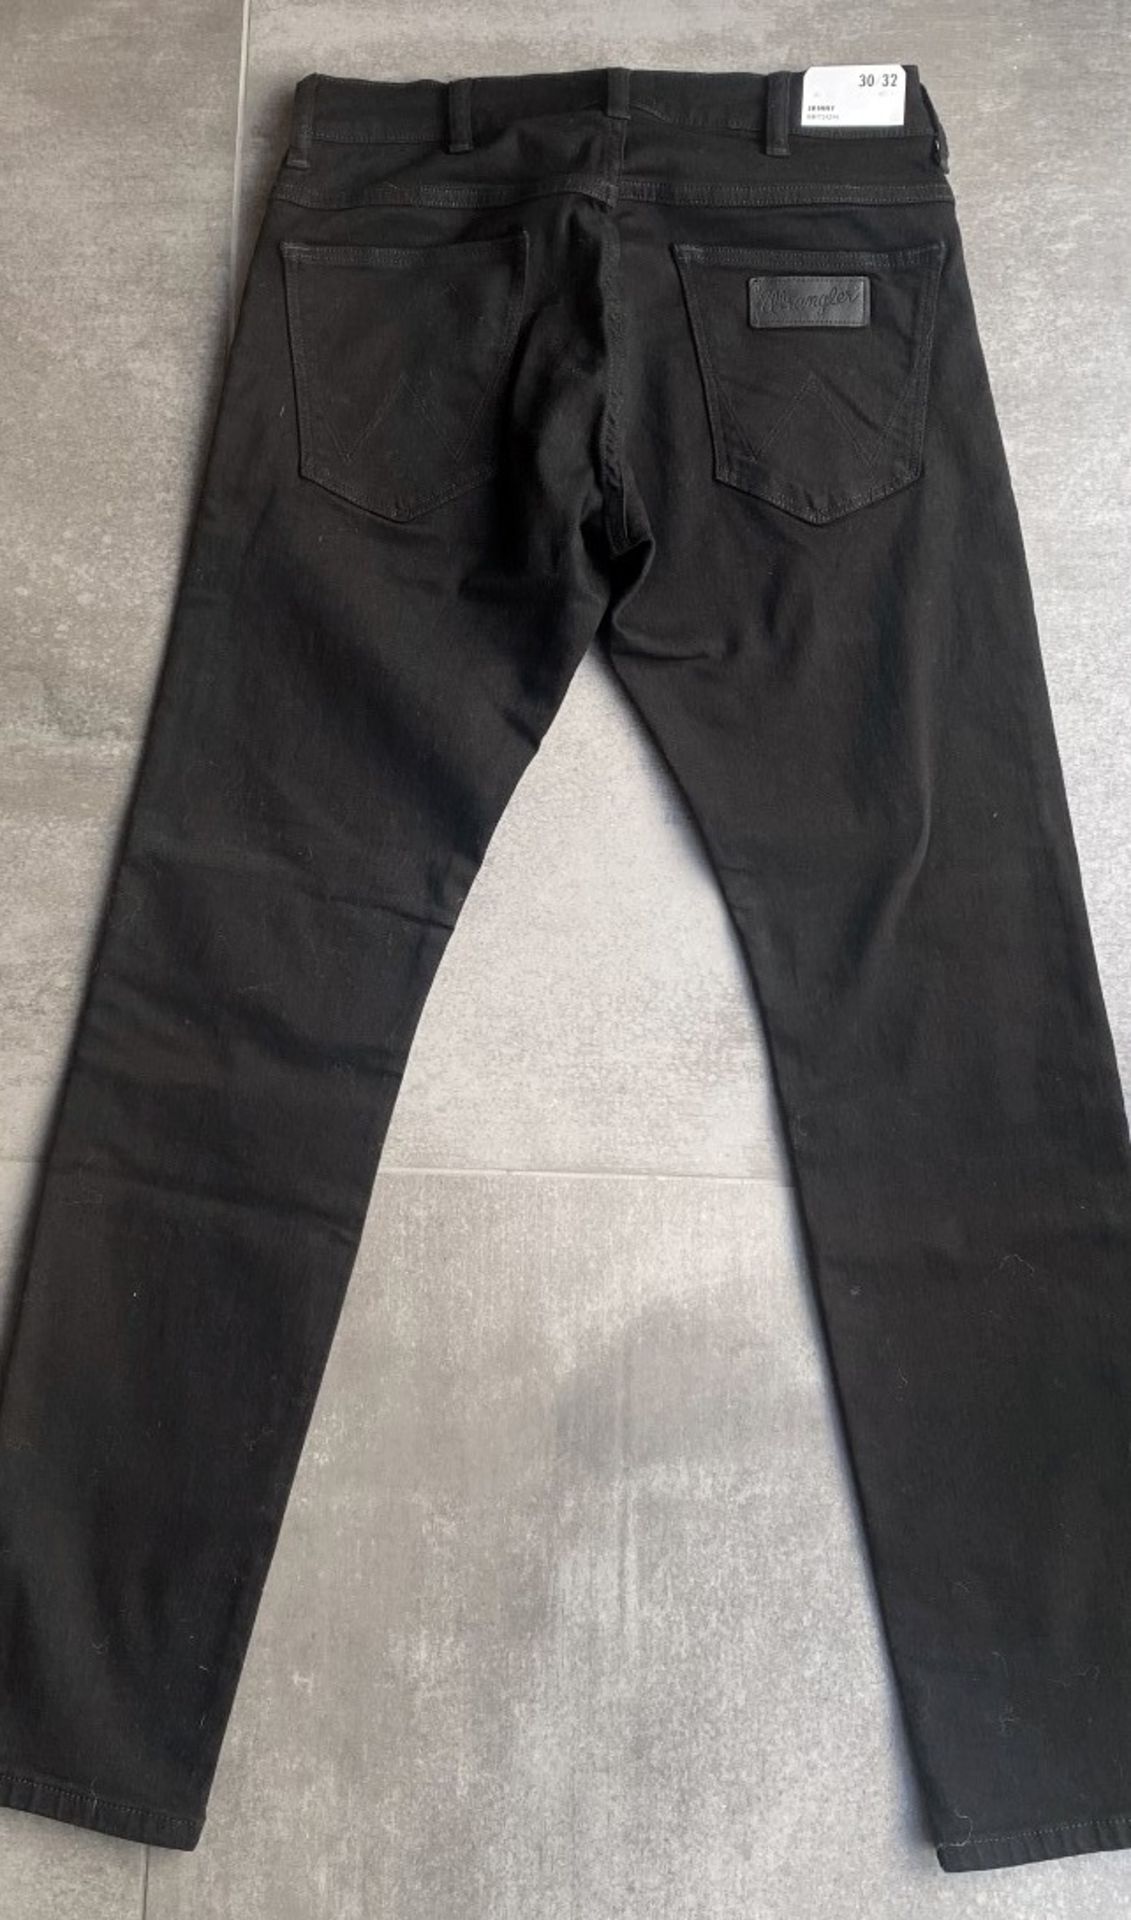 1 x Pair Of Men's Genuine Wrangler Jeans In Black - Size: 30/32 - Preowned, Like New With Tags - - Image 8 of 10